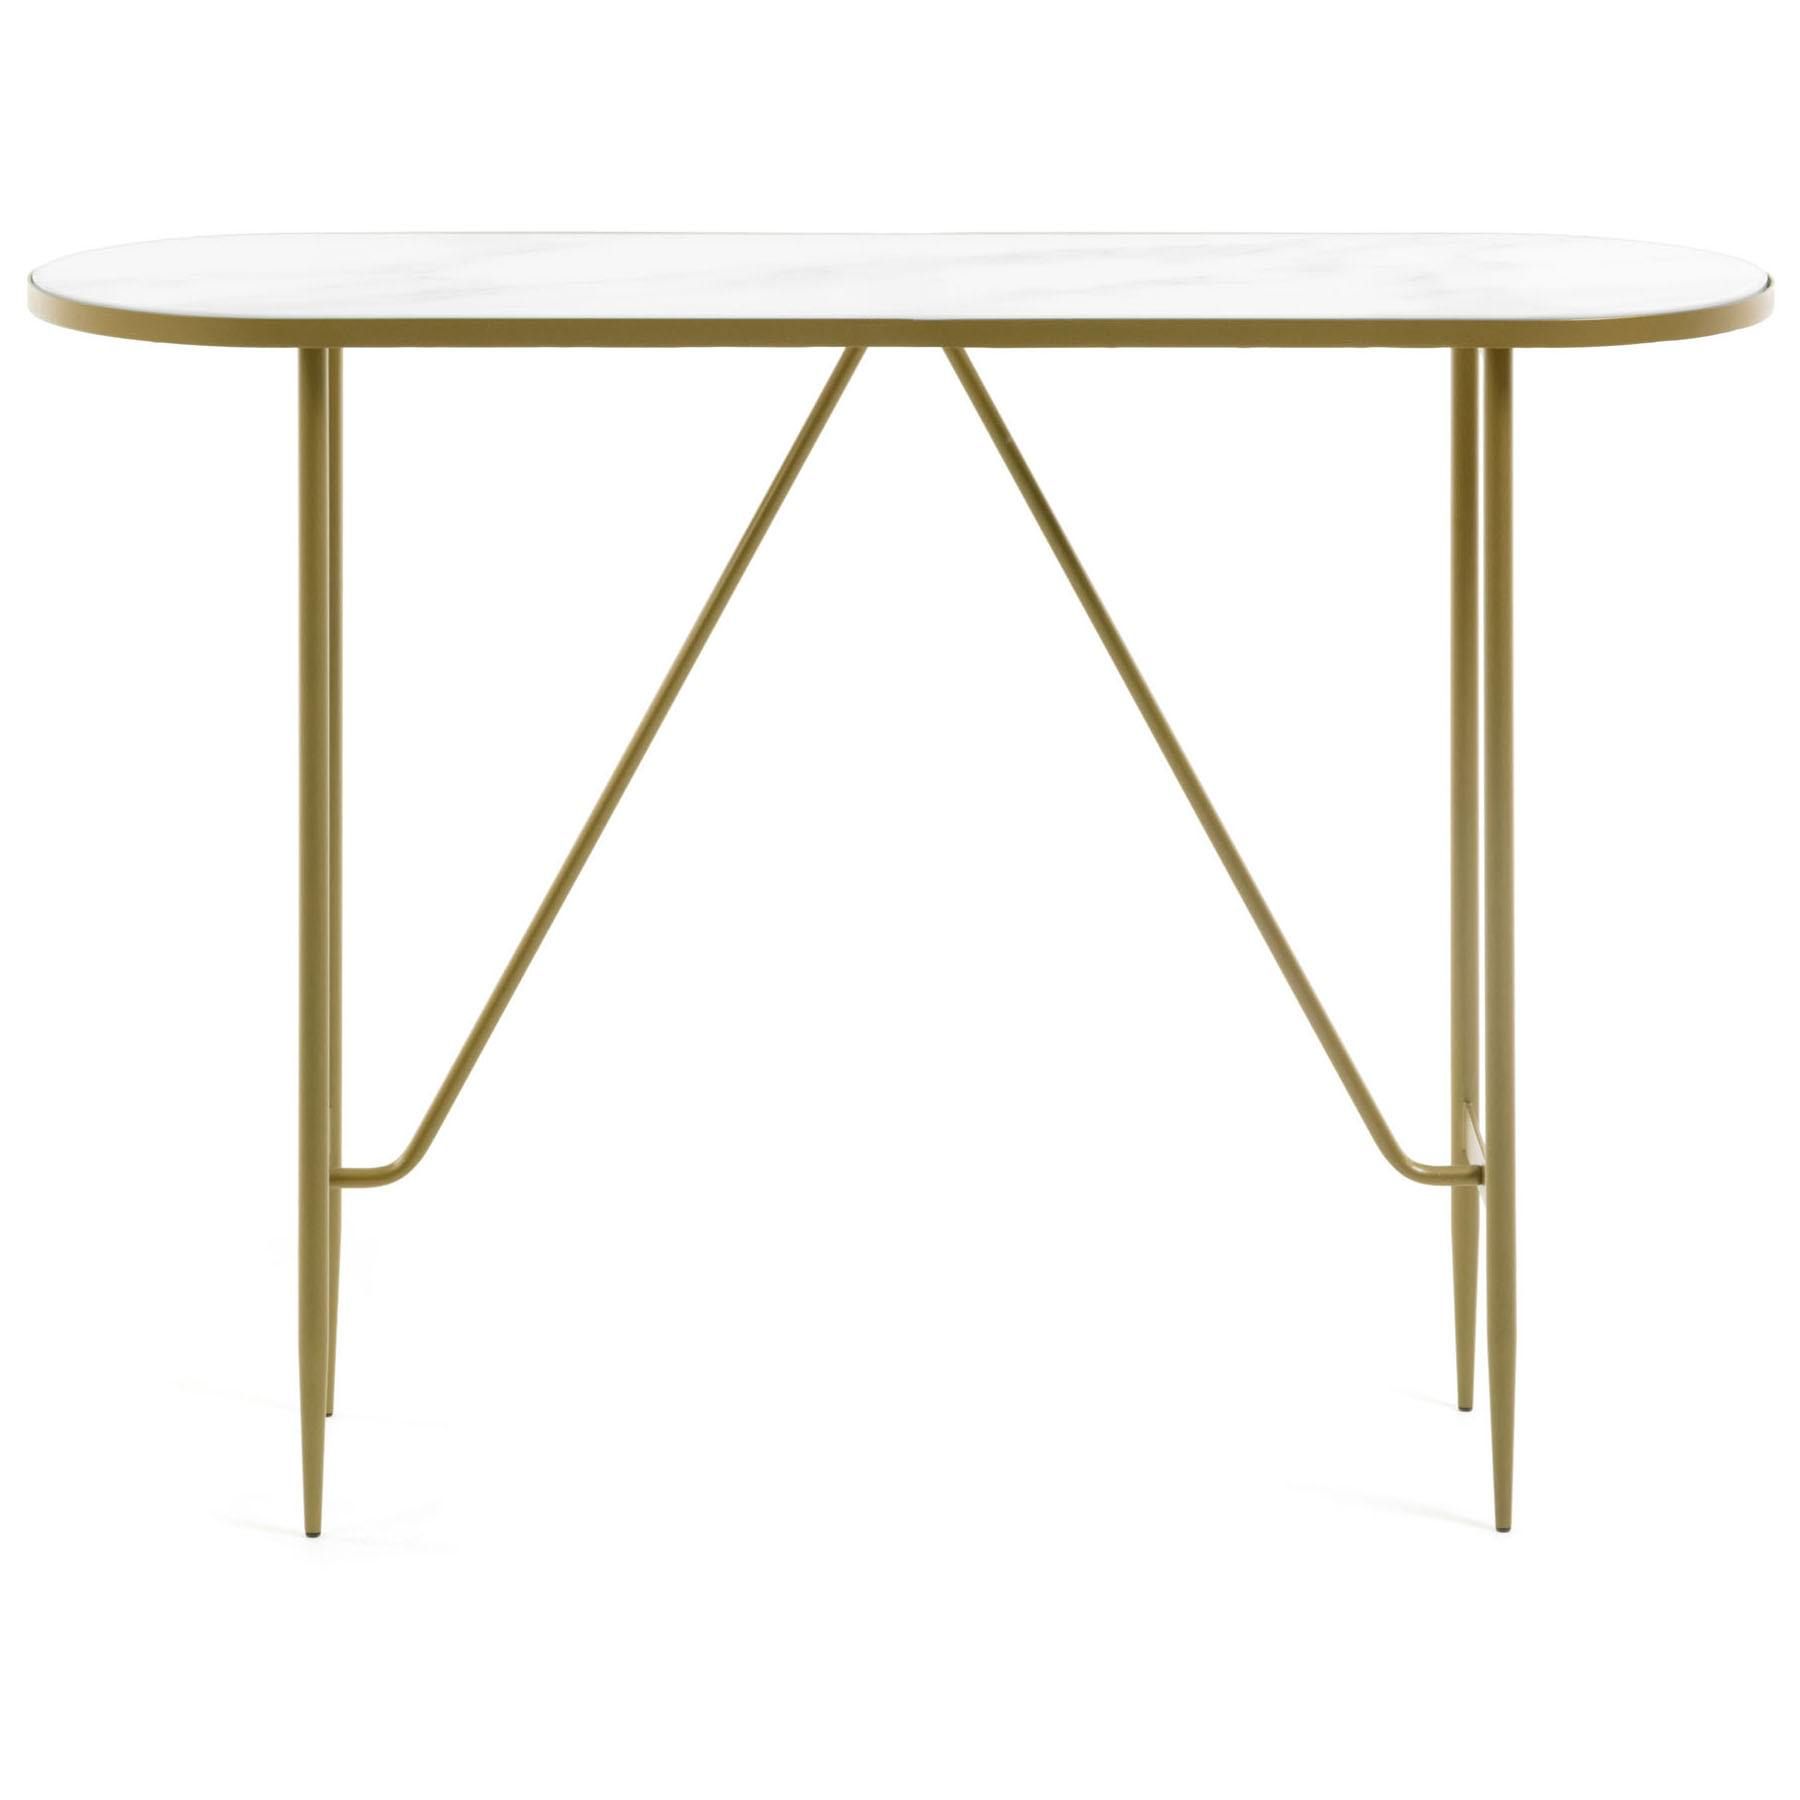 Cara Glass Top Metal Oval Console Table, 110cm With Regard To Glass And Gold Oval Console Tables (Gallery 19 of 20)